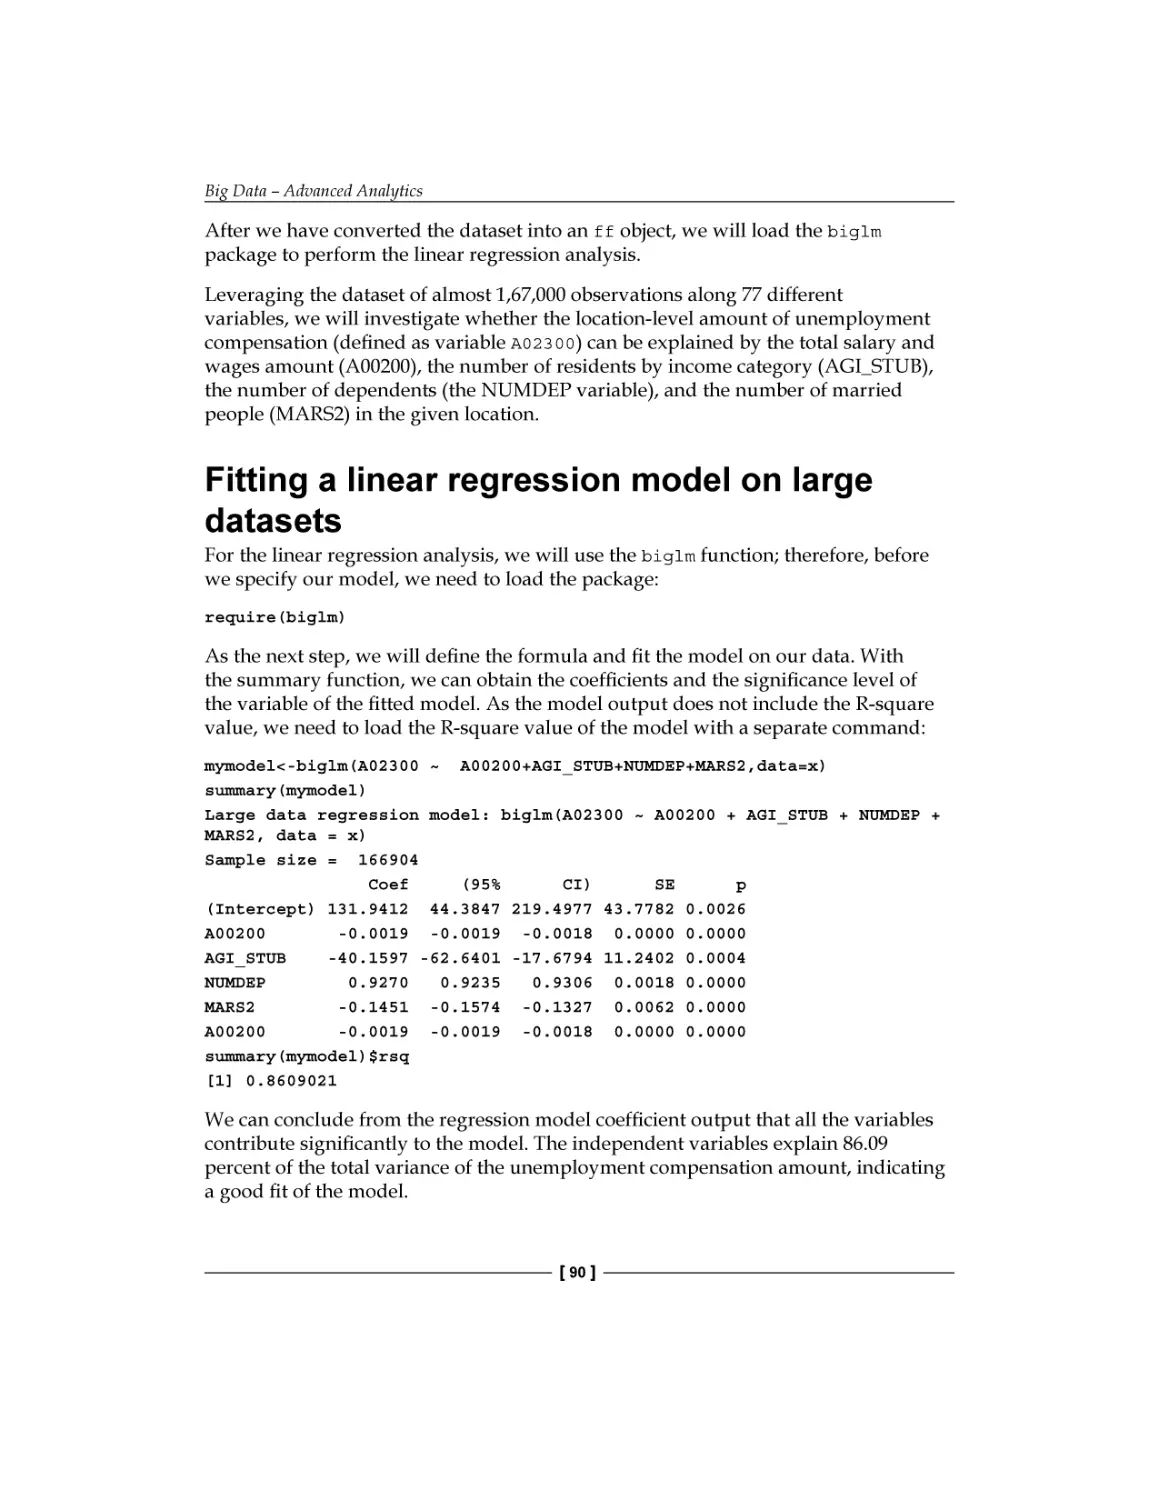 Fitting a linear regression model on large datasets